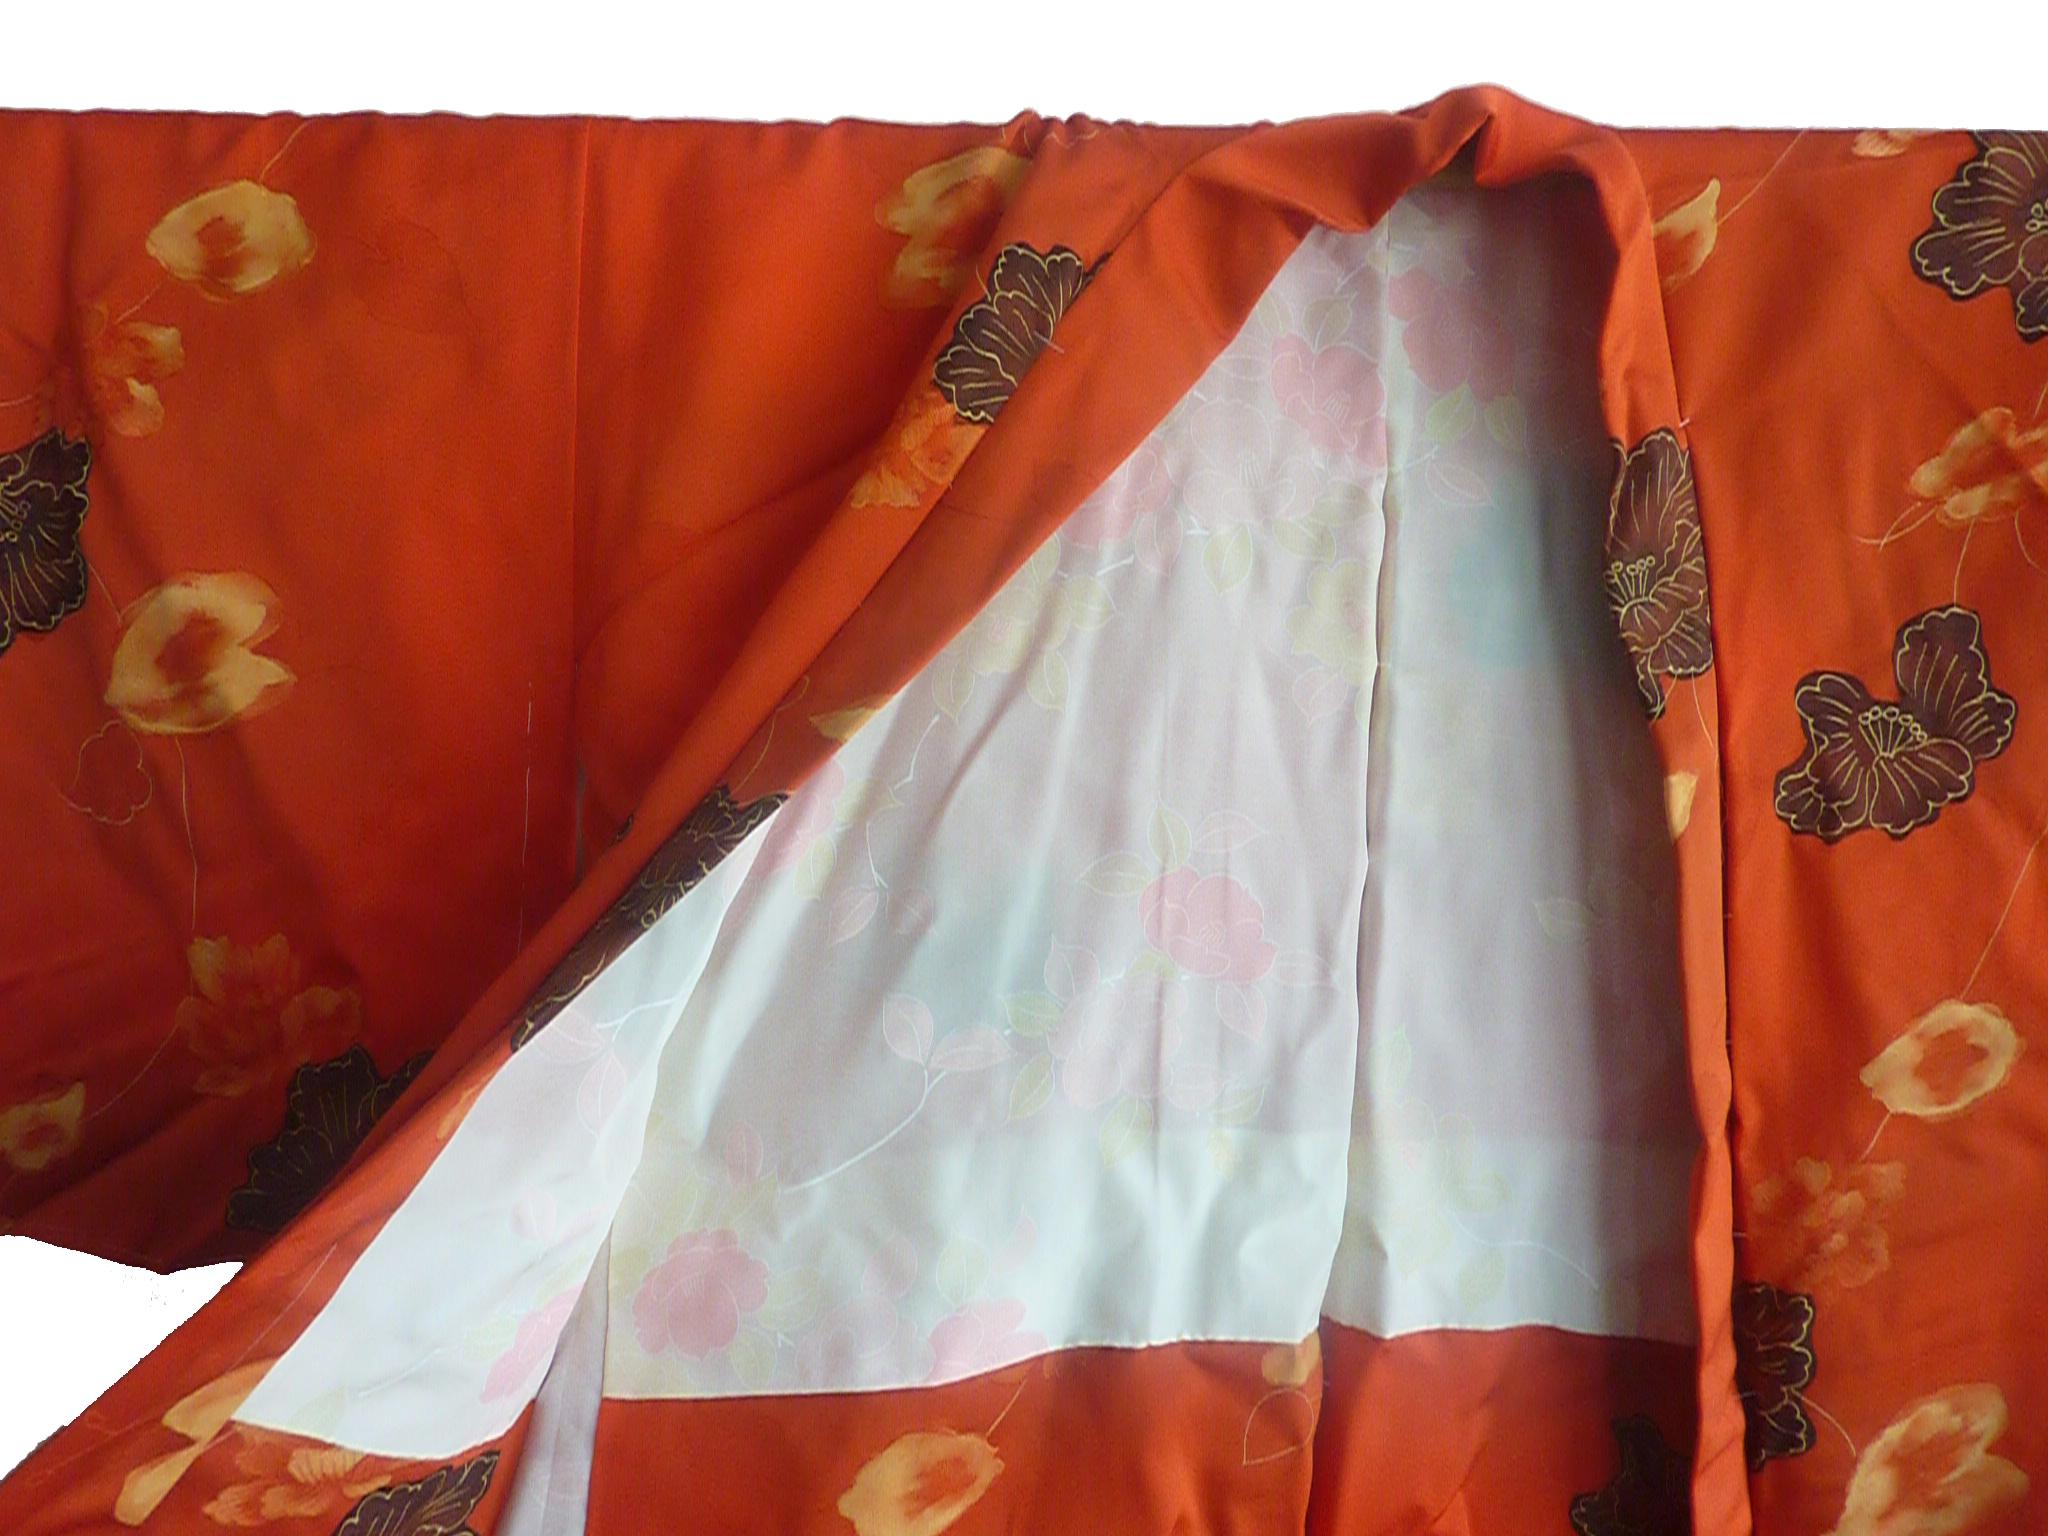 Circa: 1910-1920
Place of Origin: Japan
Material: Silk
Condition: Very good
Poppy printed all silk kimono is hand-sewn and handmade in Japan.
Mix-print silk jacquard lining.
Hand-painted gold strokes throughout 
 
Total length 34